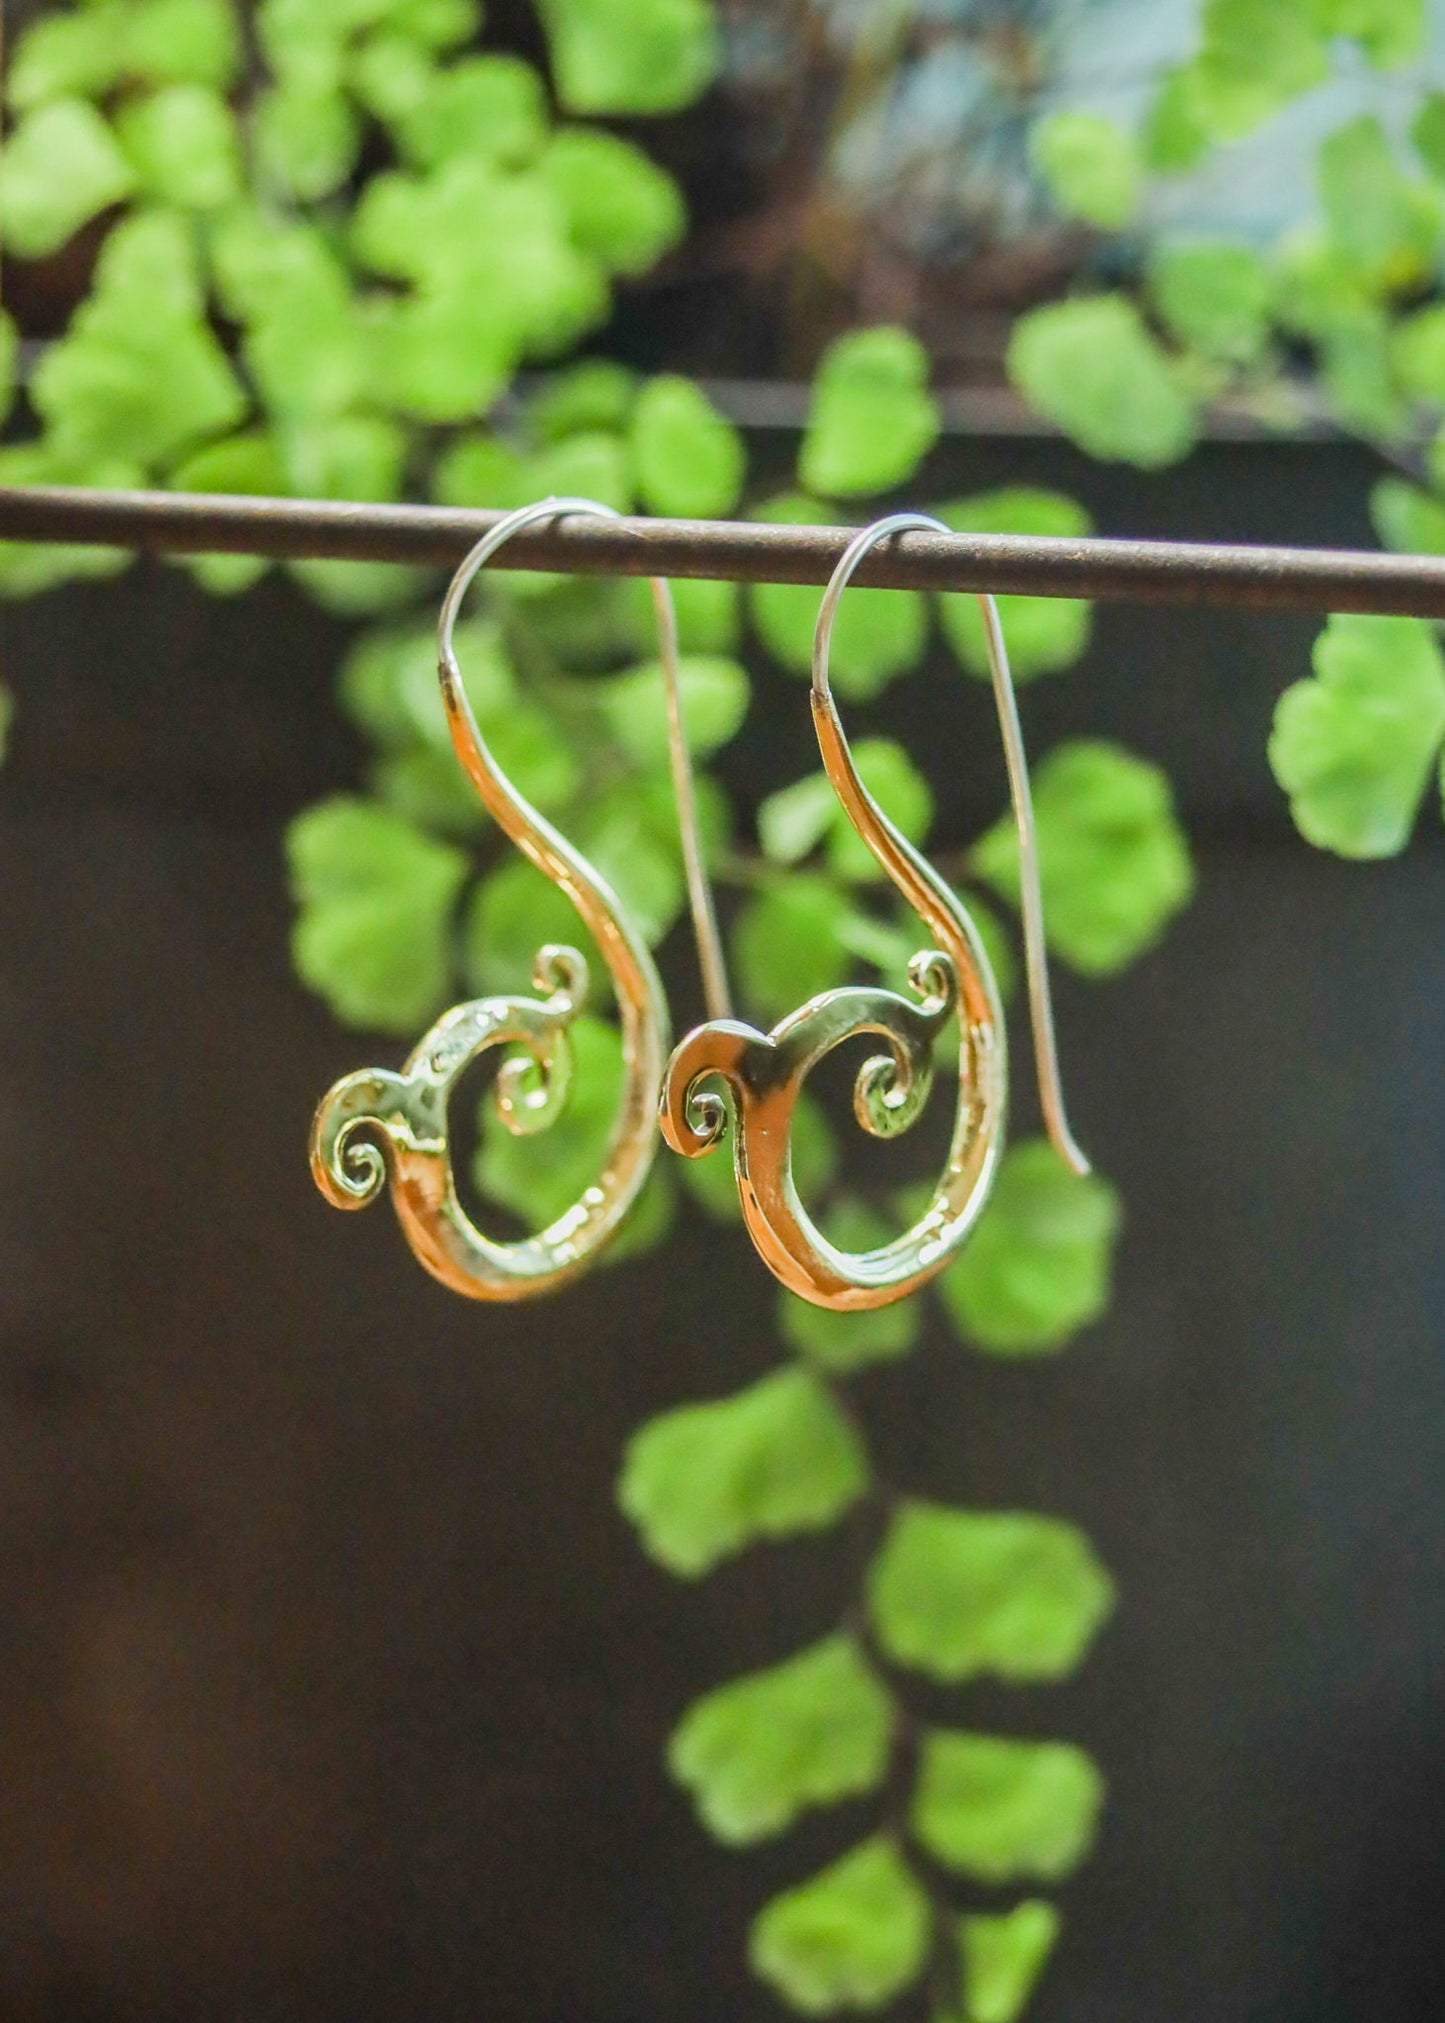 Brass Wave Spiral Earrings | Geometric Ocean Nature Inspired Jewelry | Elven Fairycore Whimsical Fantasy Cottagecore | Boho Gold Tone Hoops